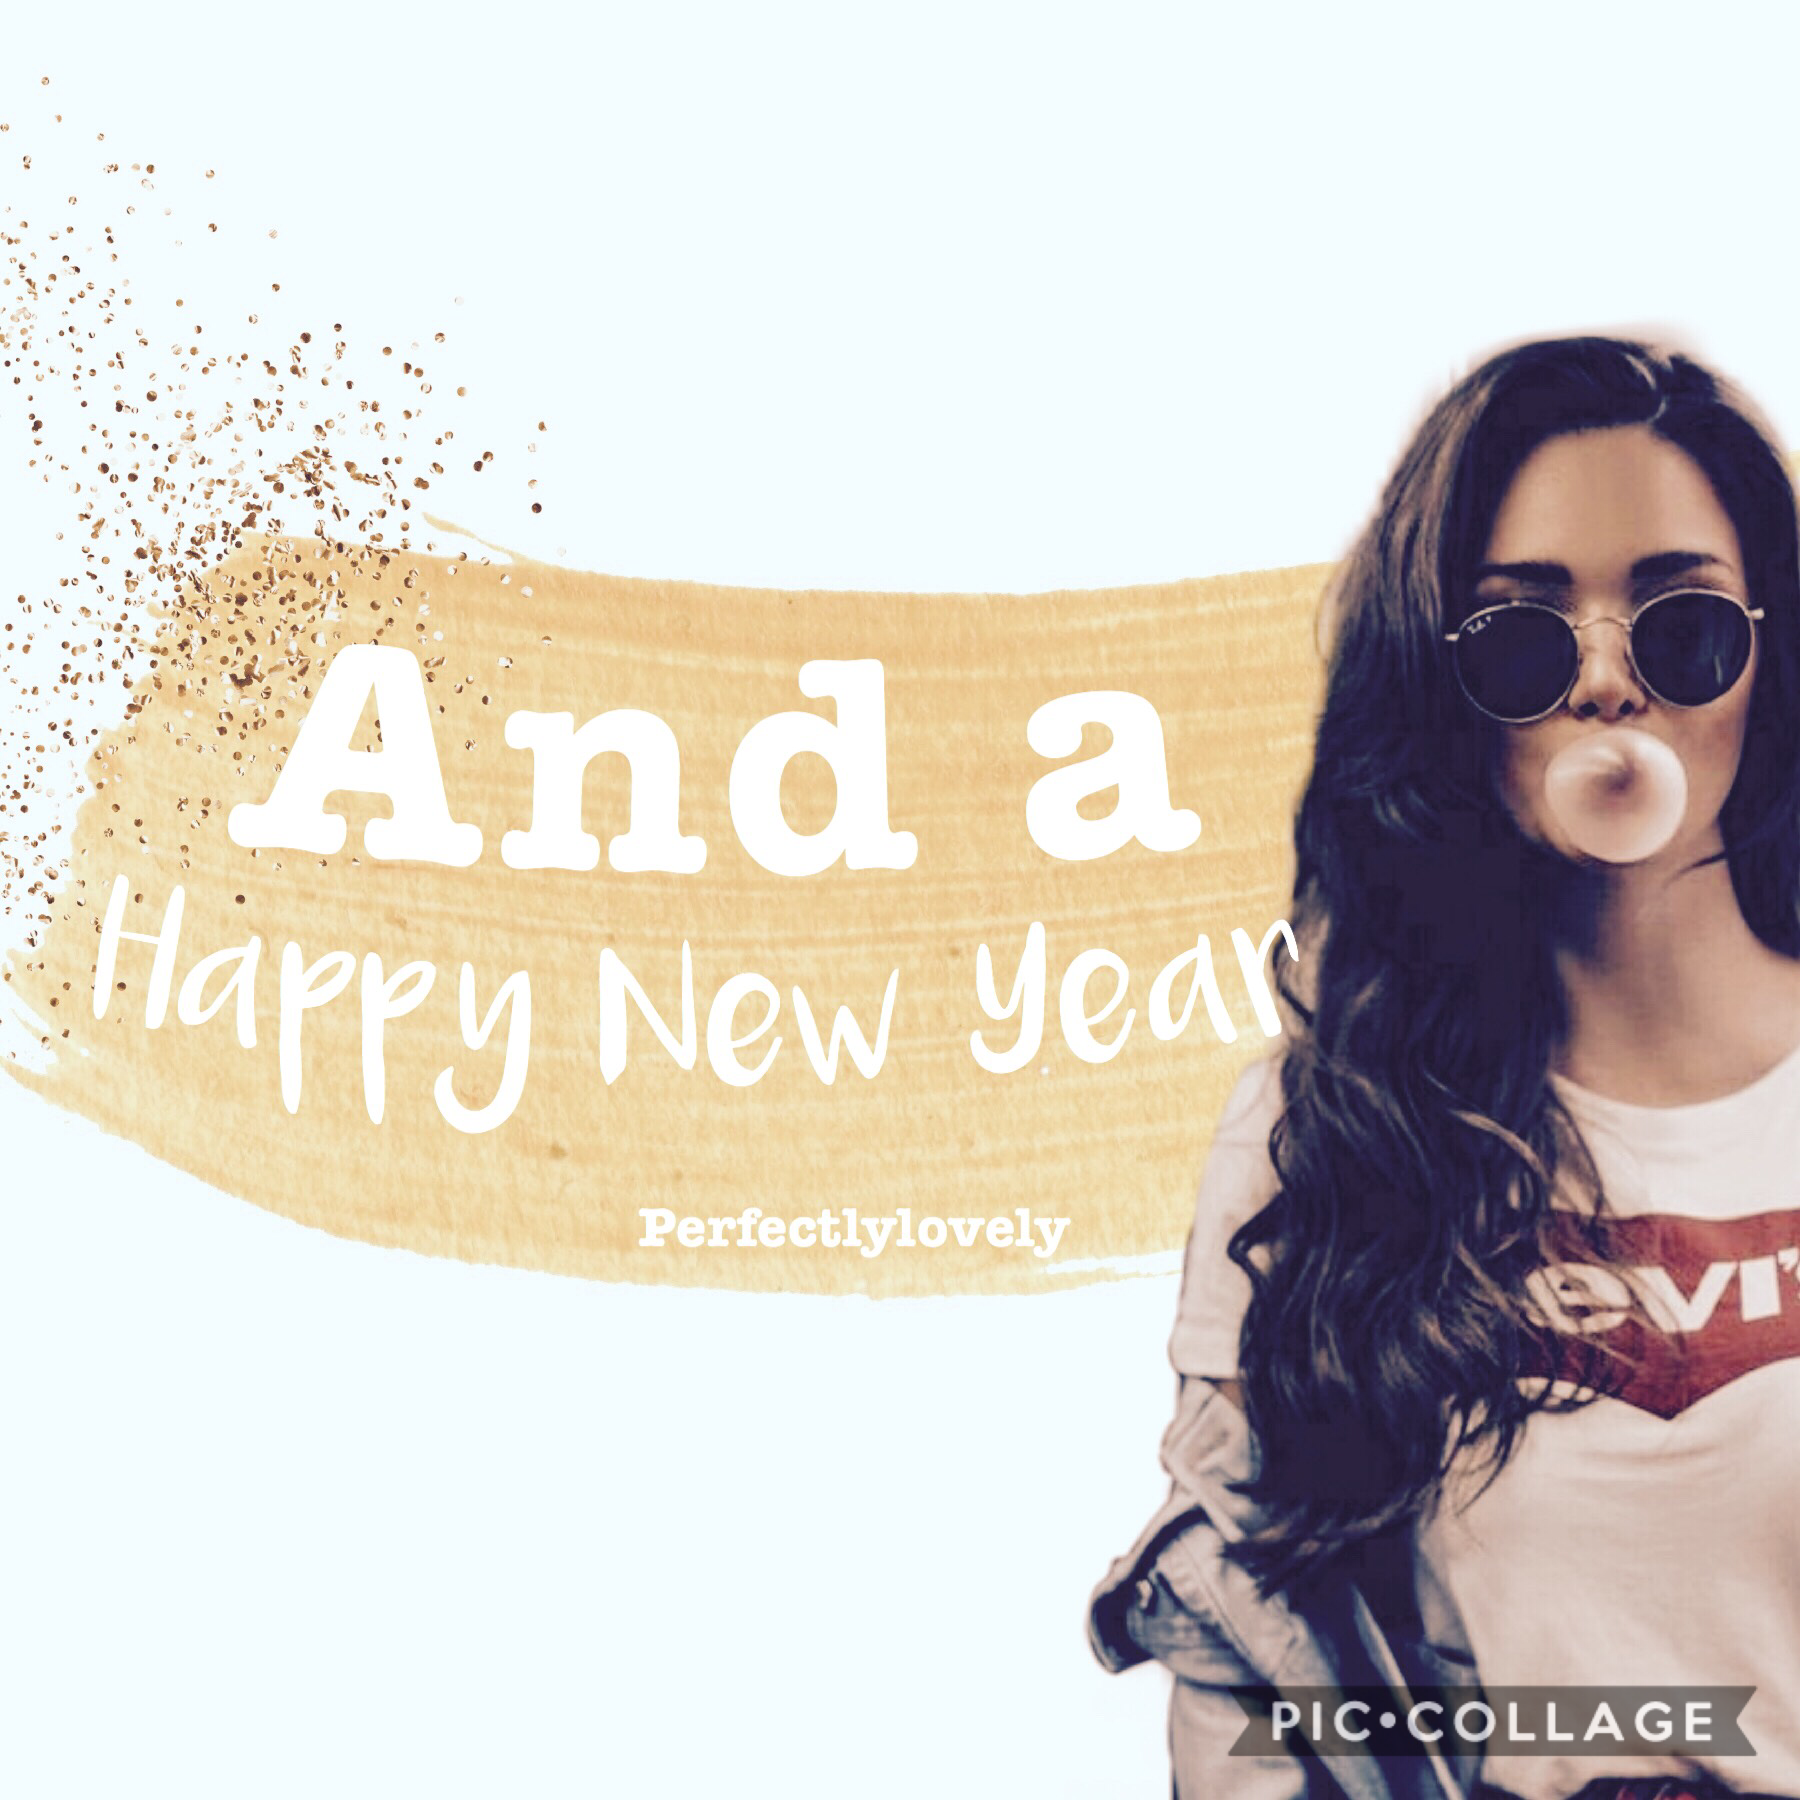 Happy new year! Tap
Heyo my friends! How are you guys? I’m so excited for 2019 and everything it will bring. 
Qotd: favorite 2018 memory
Aotd: turning 18 and getting a car!